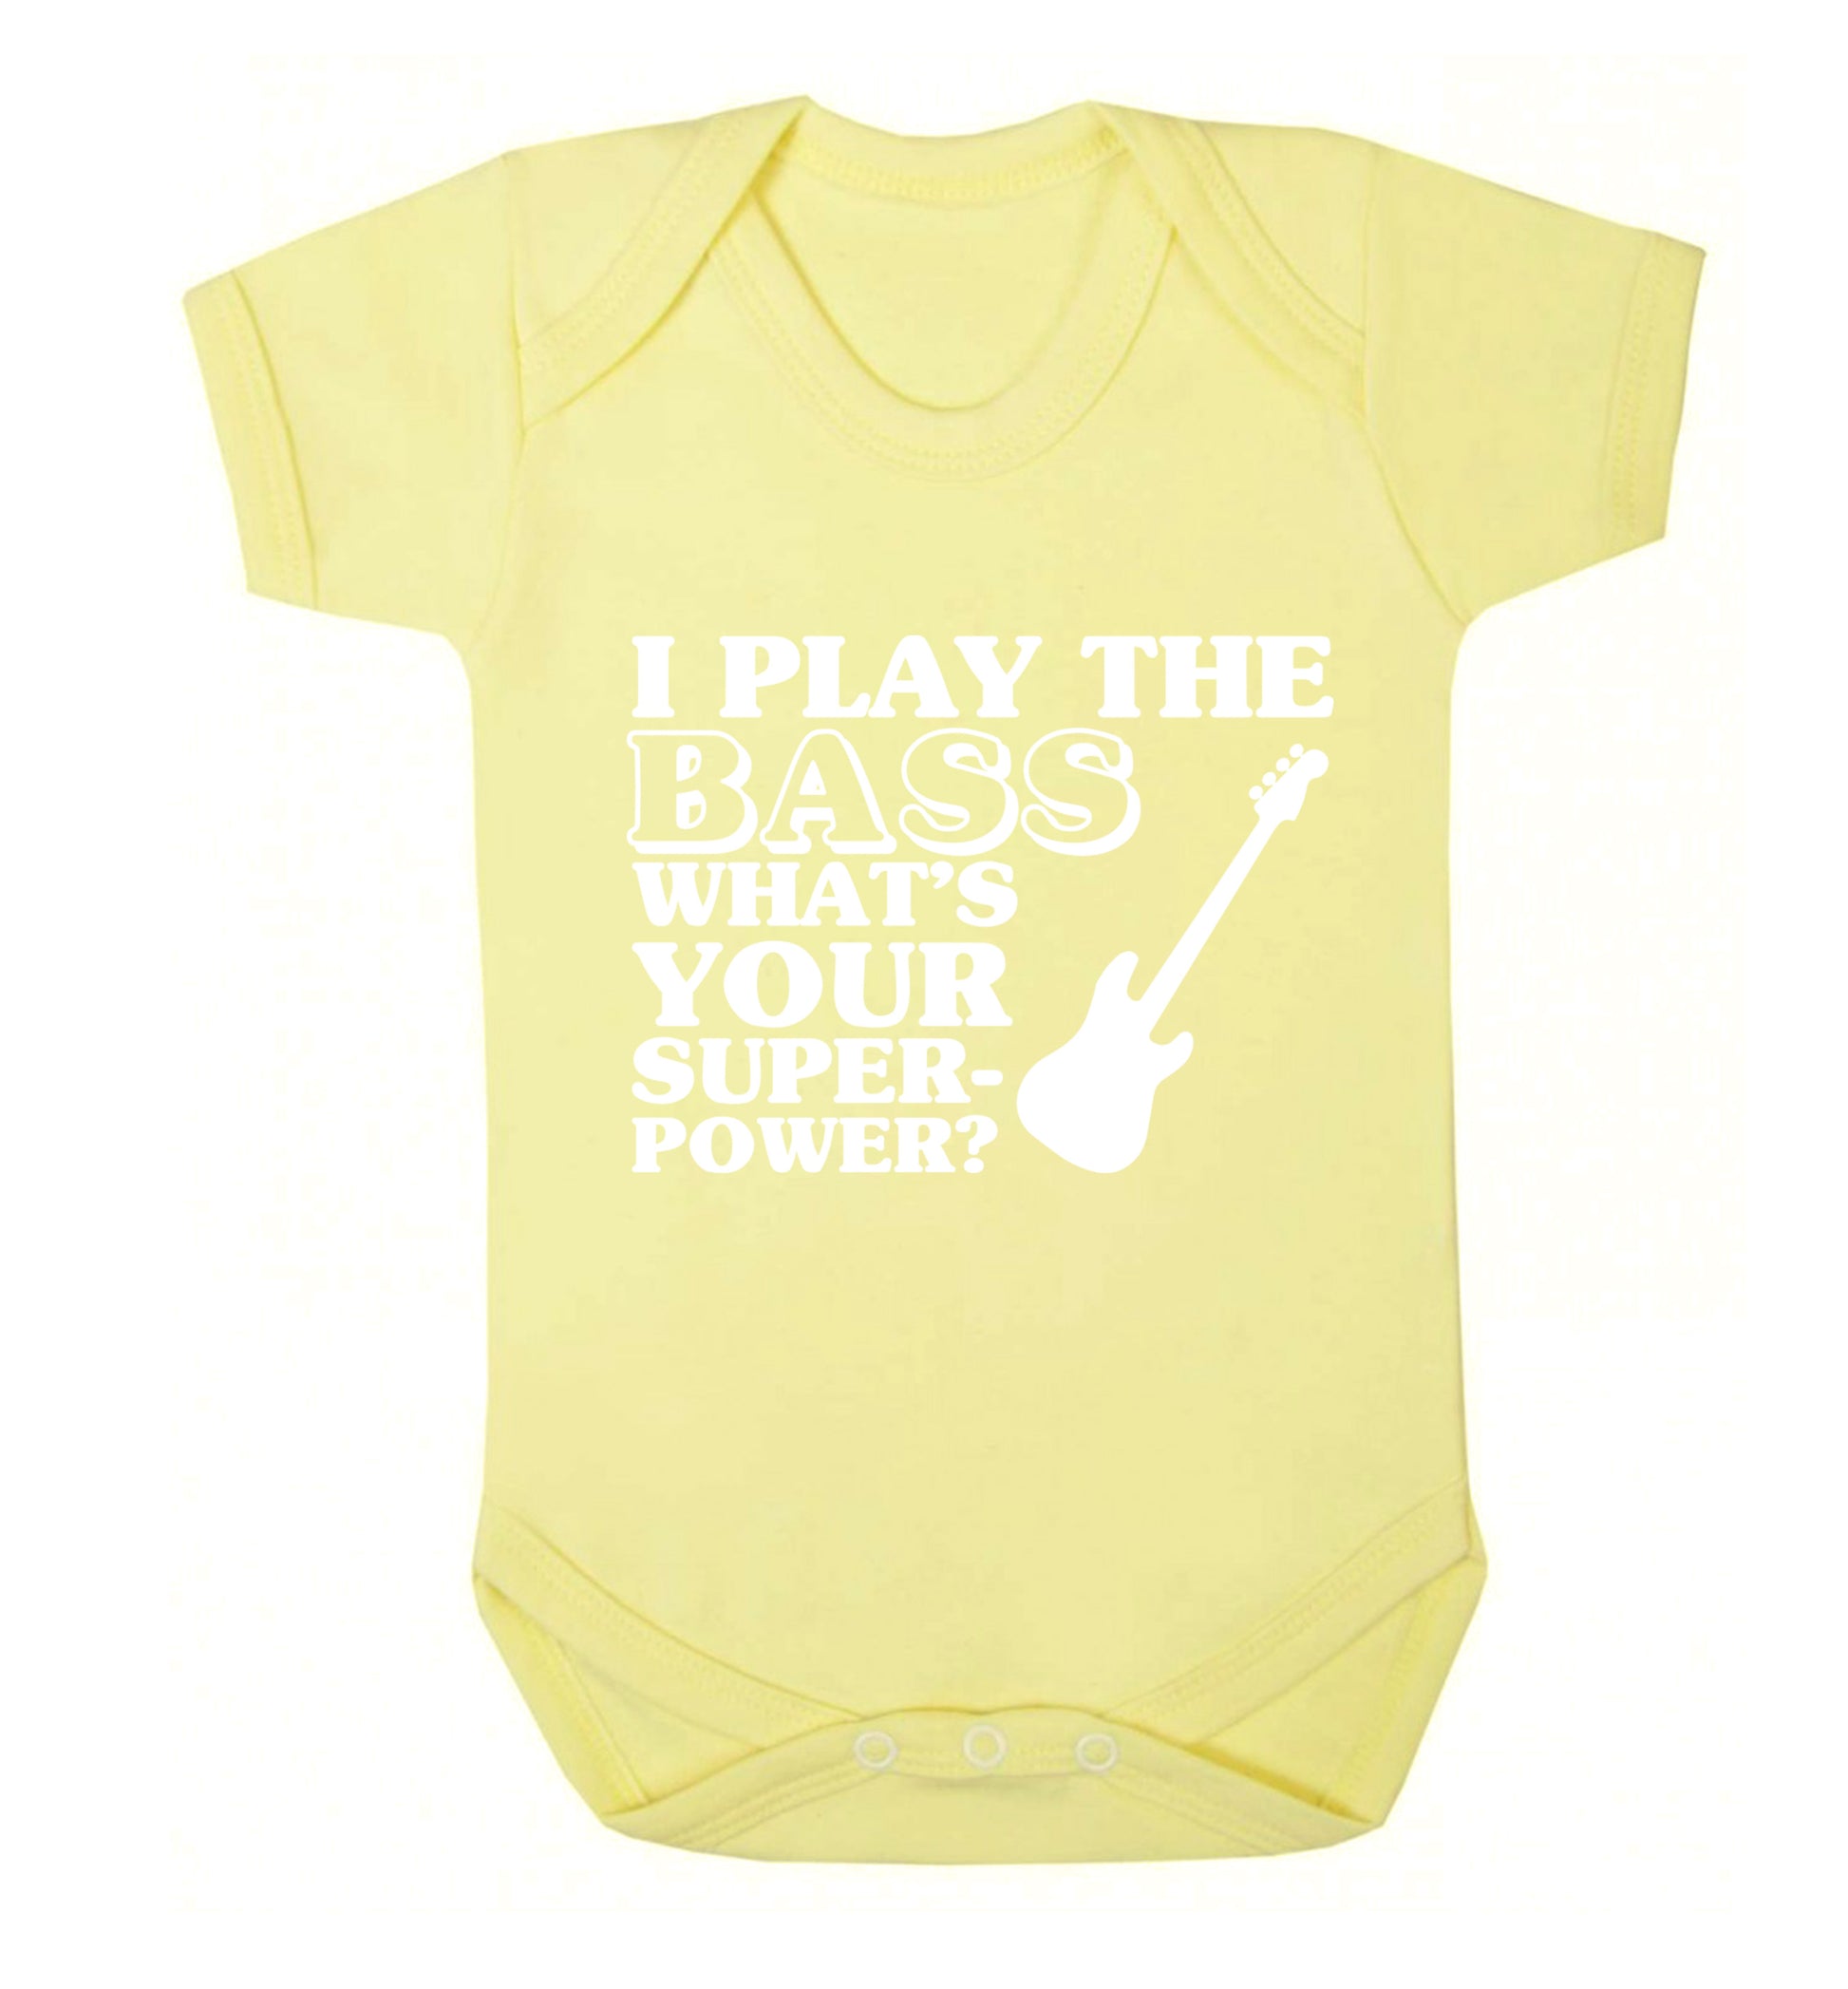 I play the bass what's your superpower? Baby Vest pale yellow 18-24 months